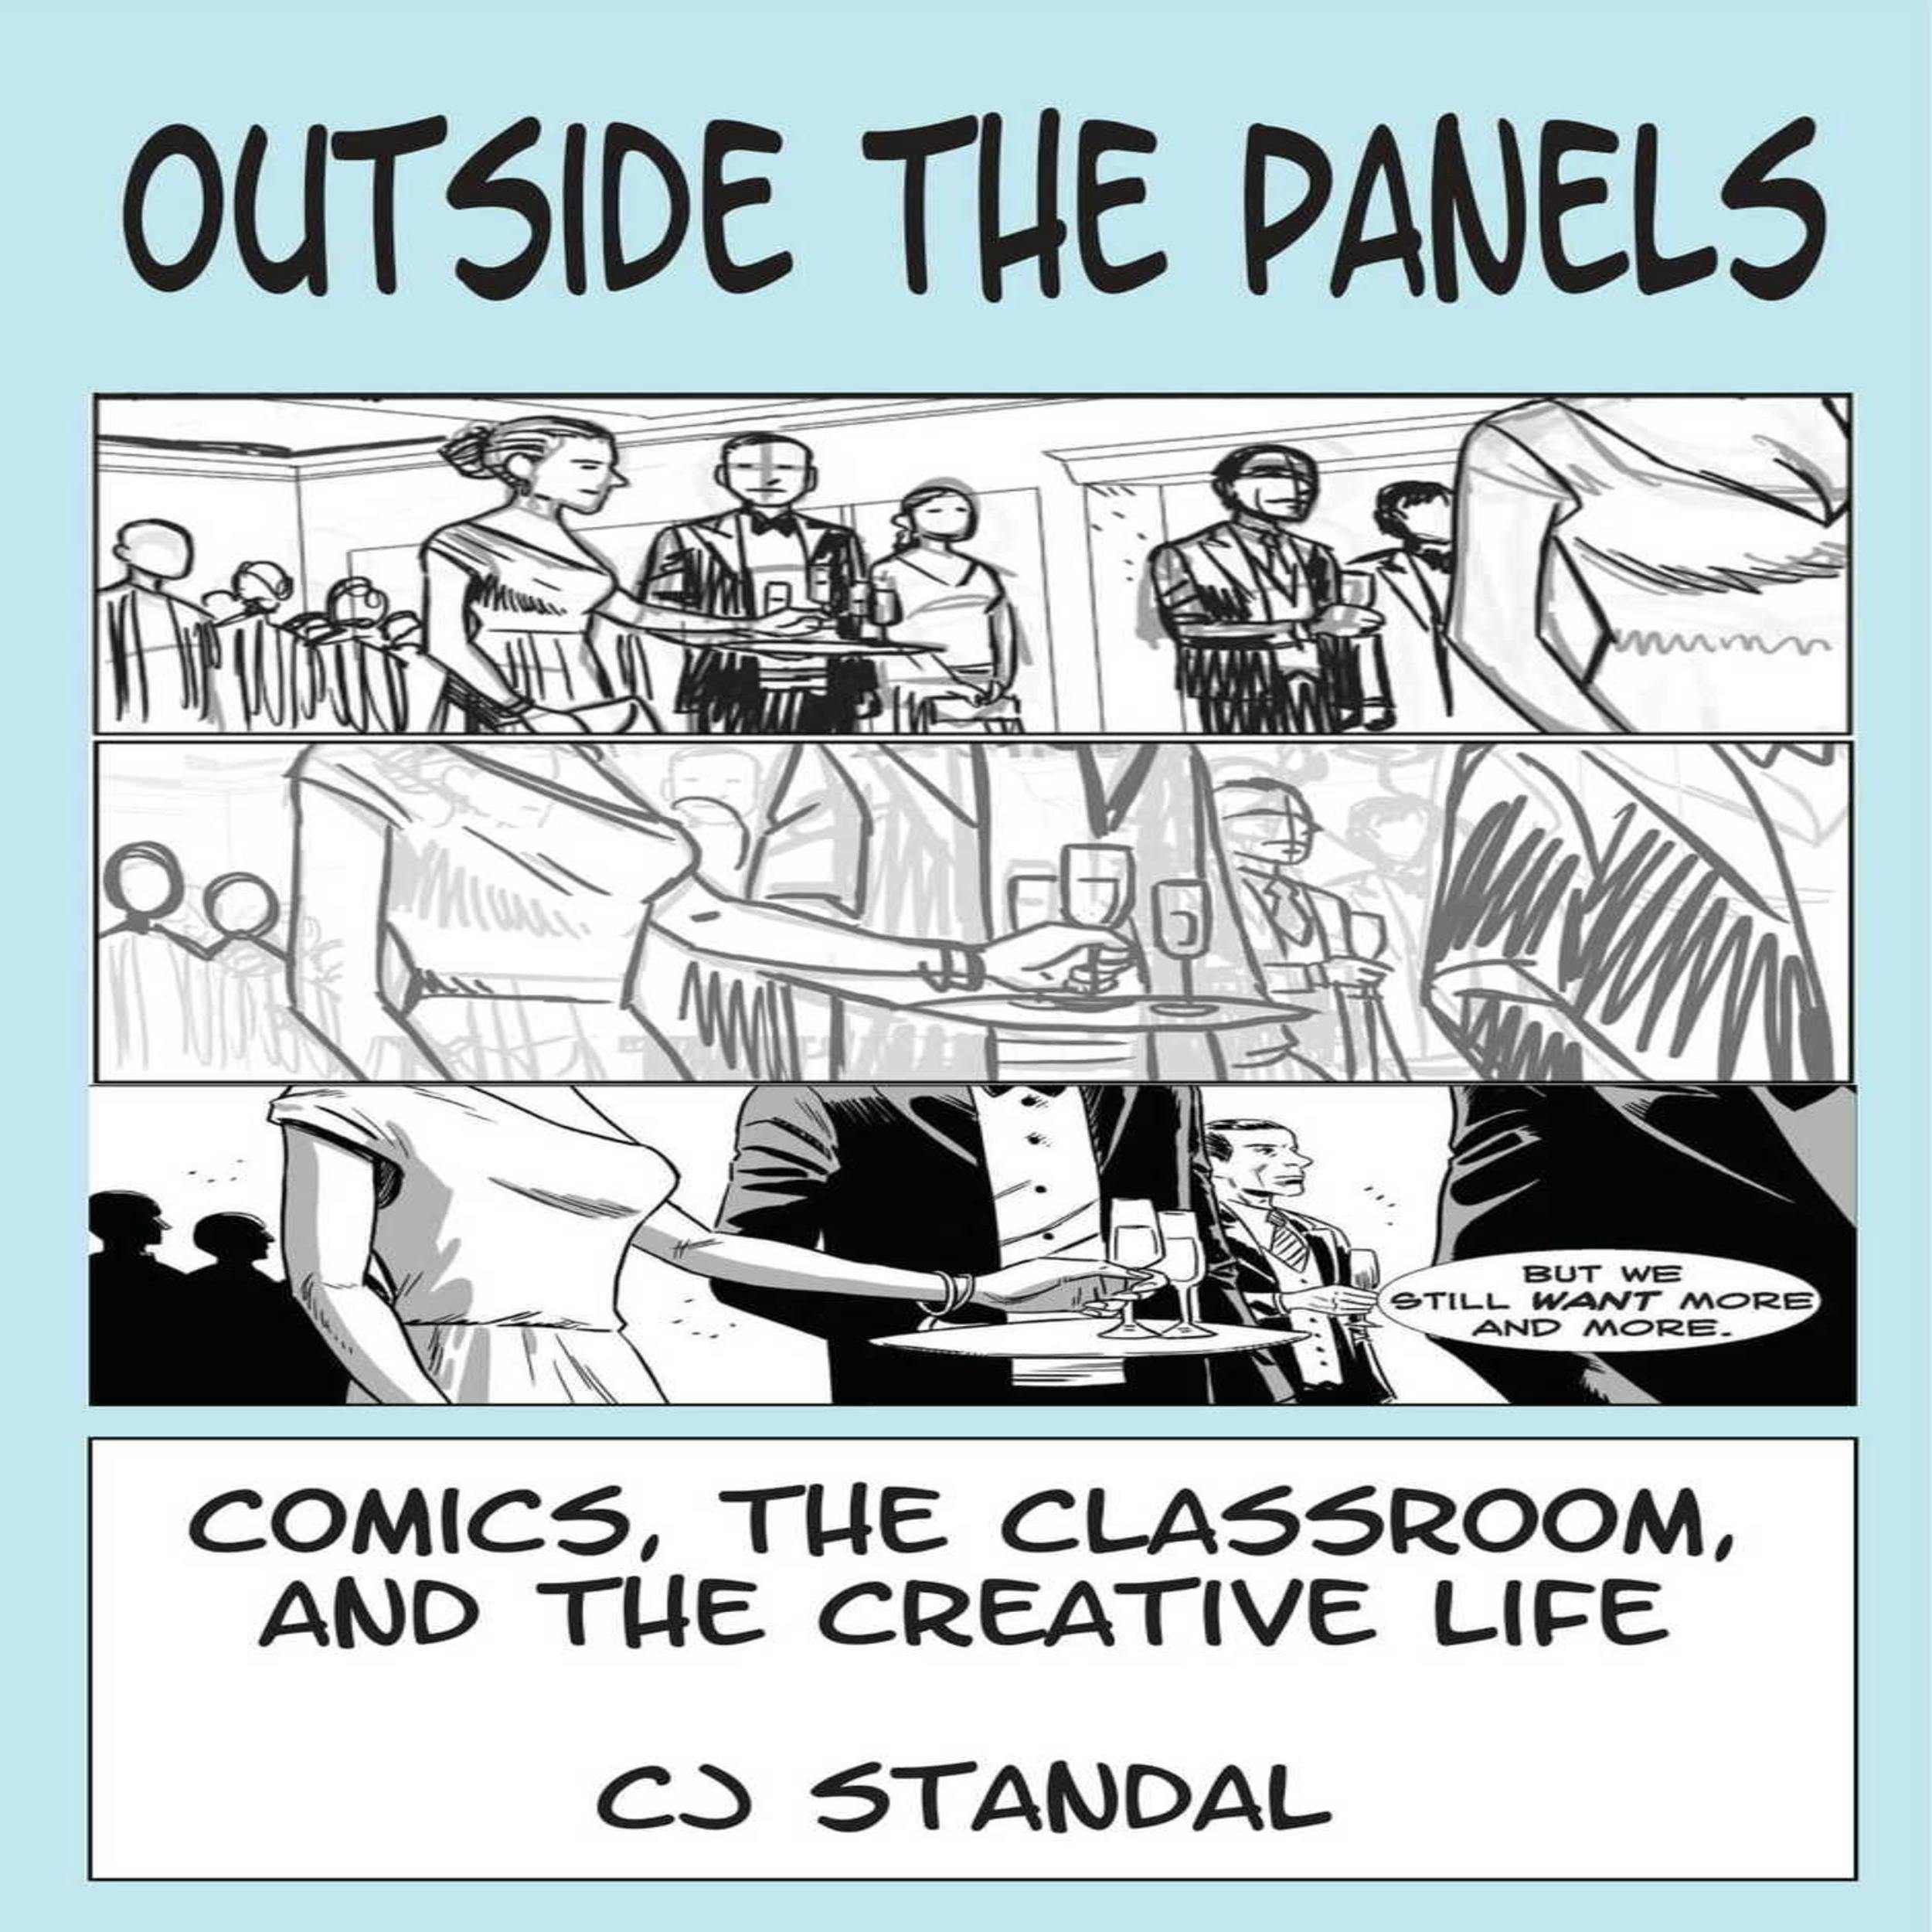 Outside the Panels: Comics, the Classroom, and the Creative Life - CJ Standal